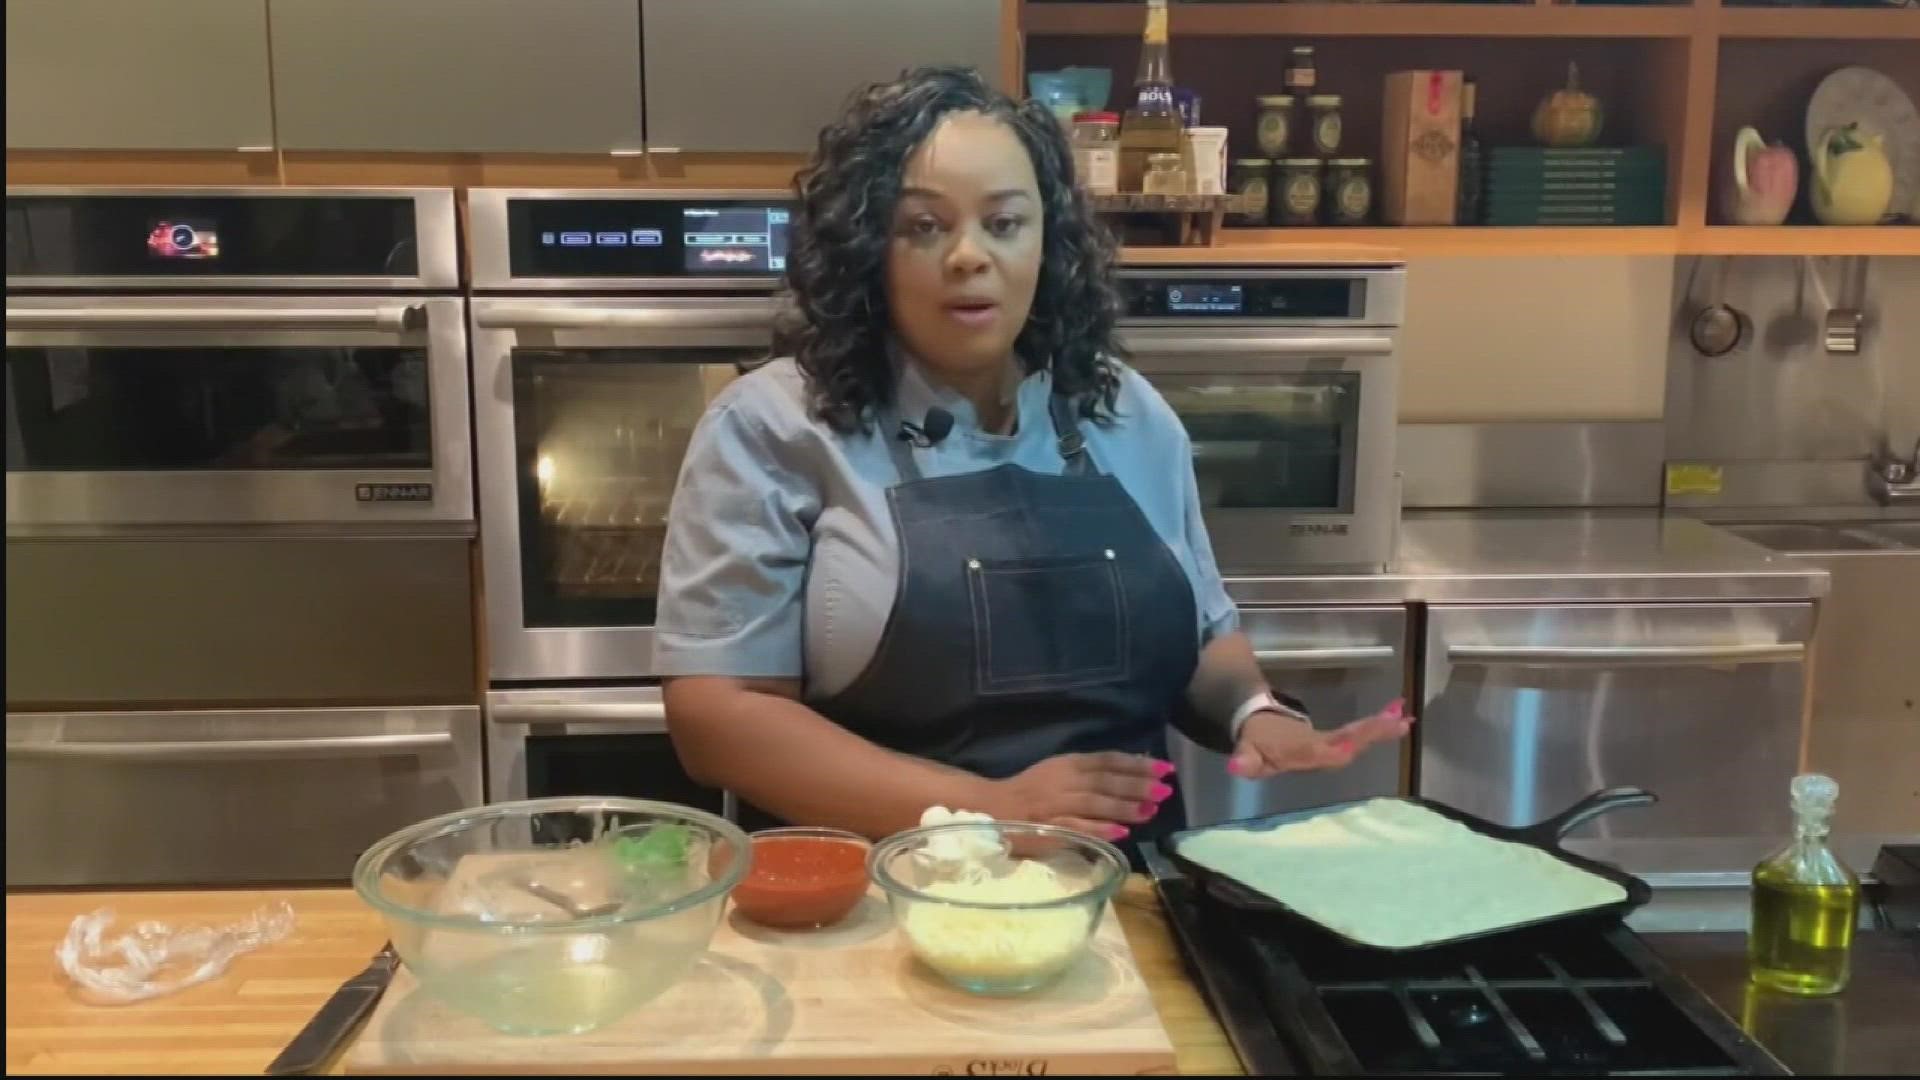 Chef Dee Lavigne of the Southern Food and Beverage Museum shows you how to make pizza using a cast iron skillet.